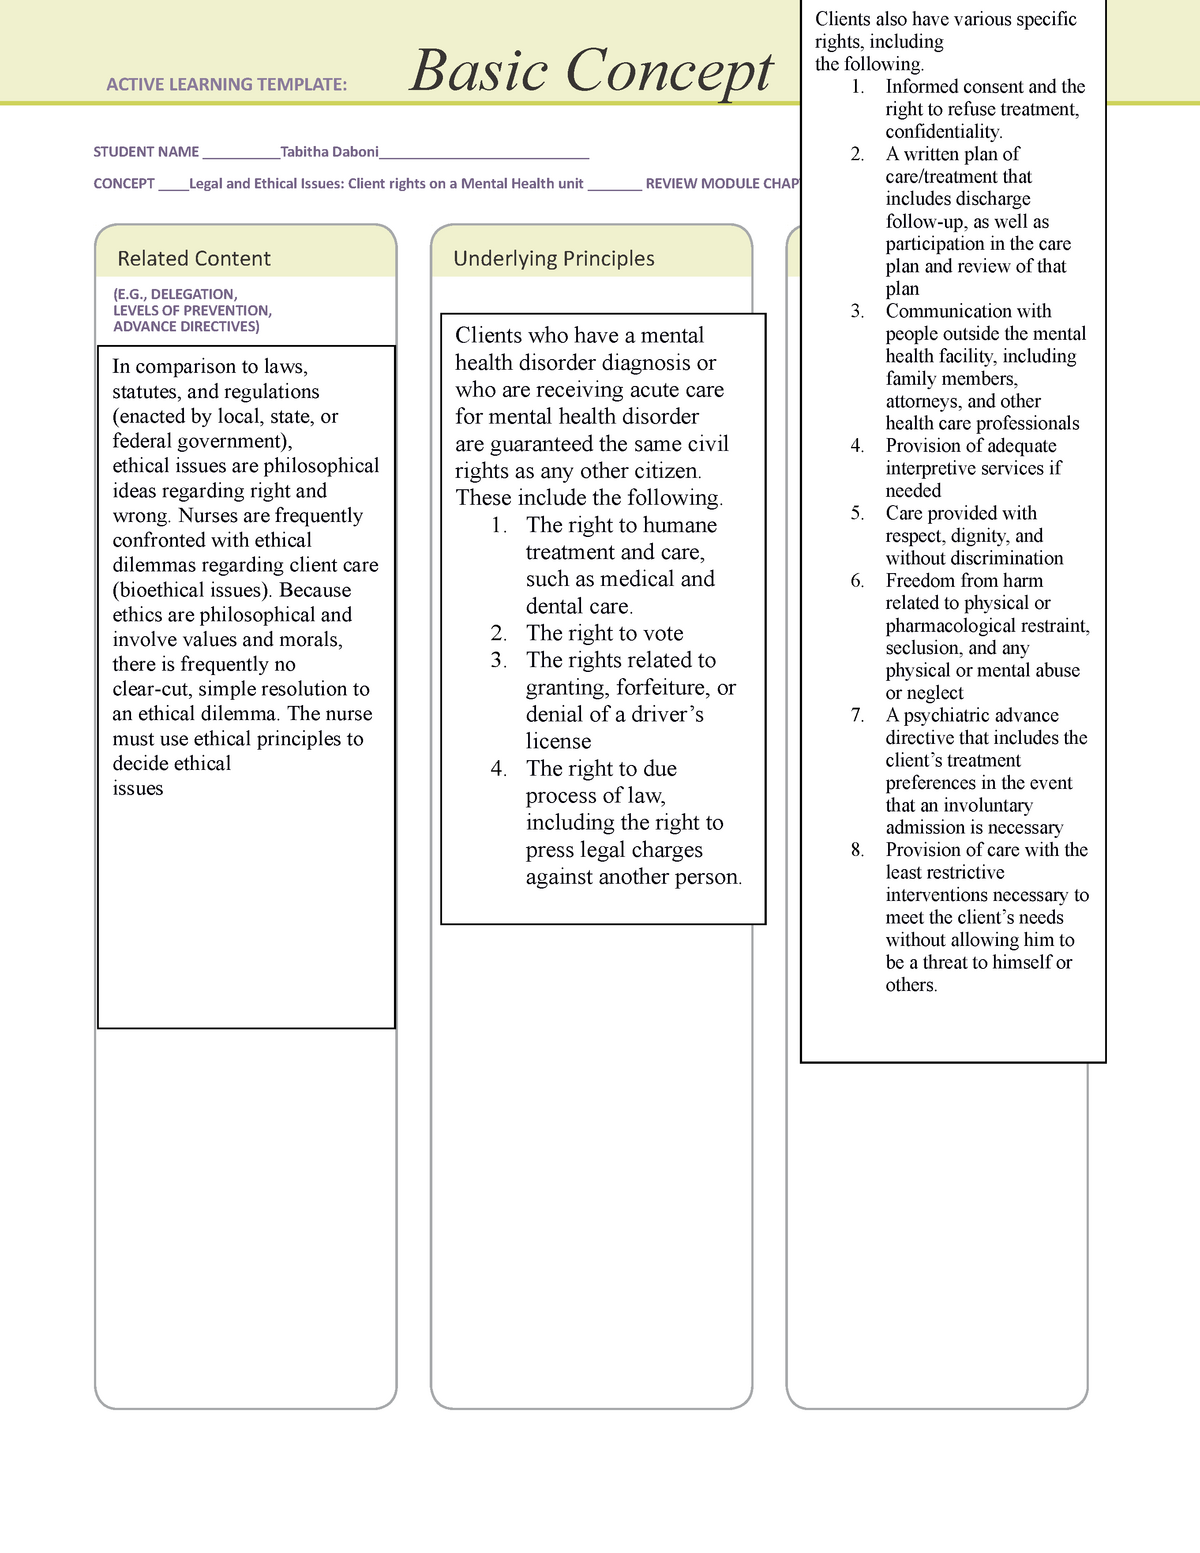 Ati Basic Concept Template Ethical Responsibilities Basic Concept To